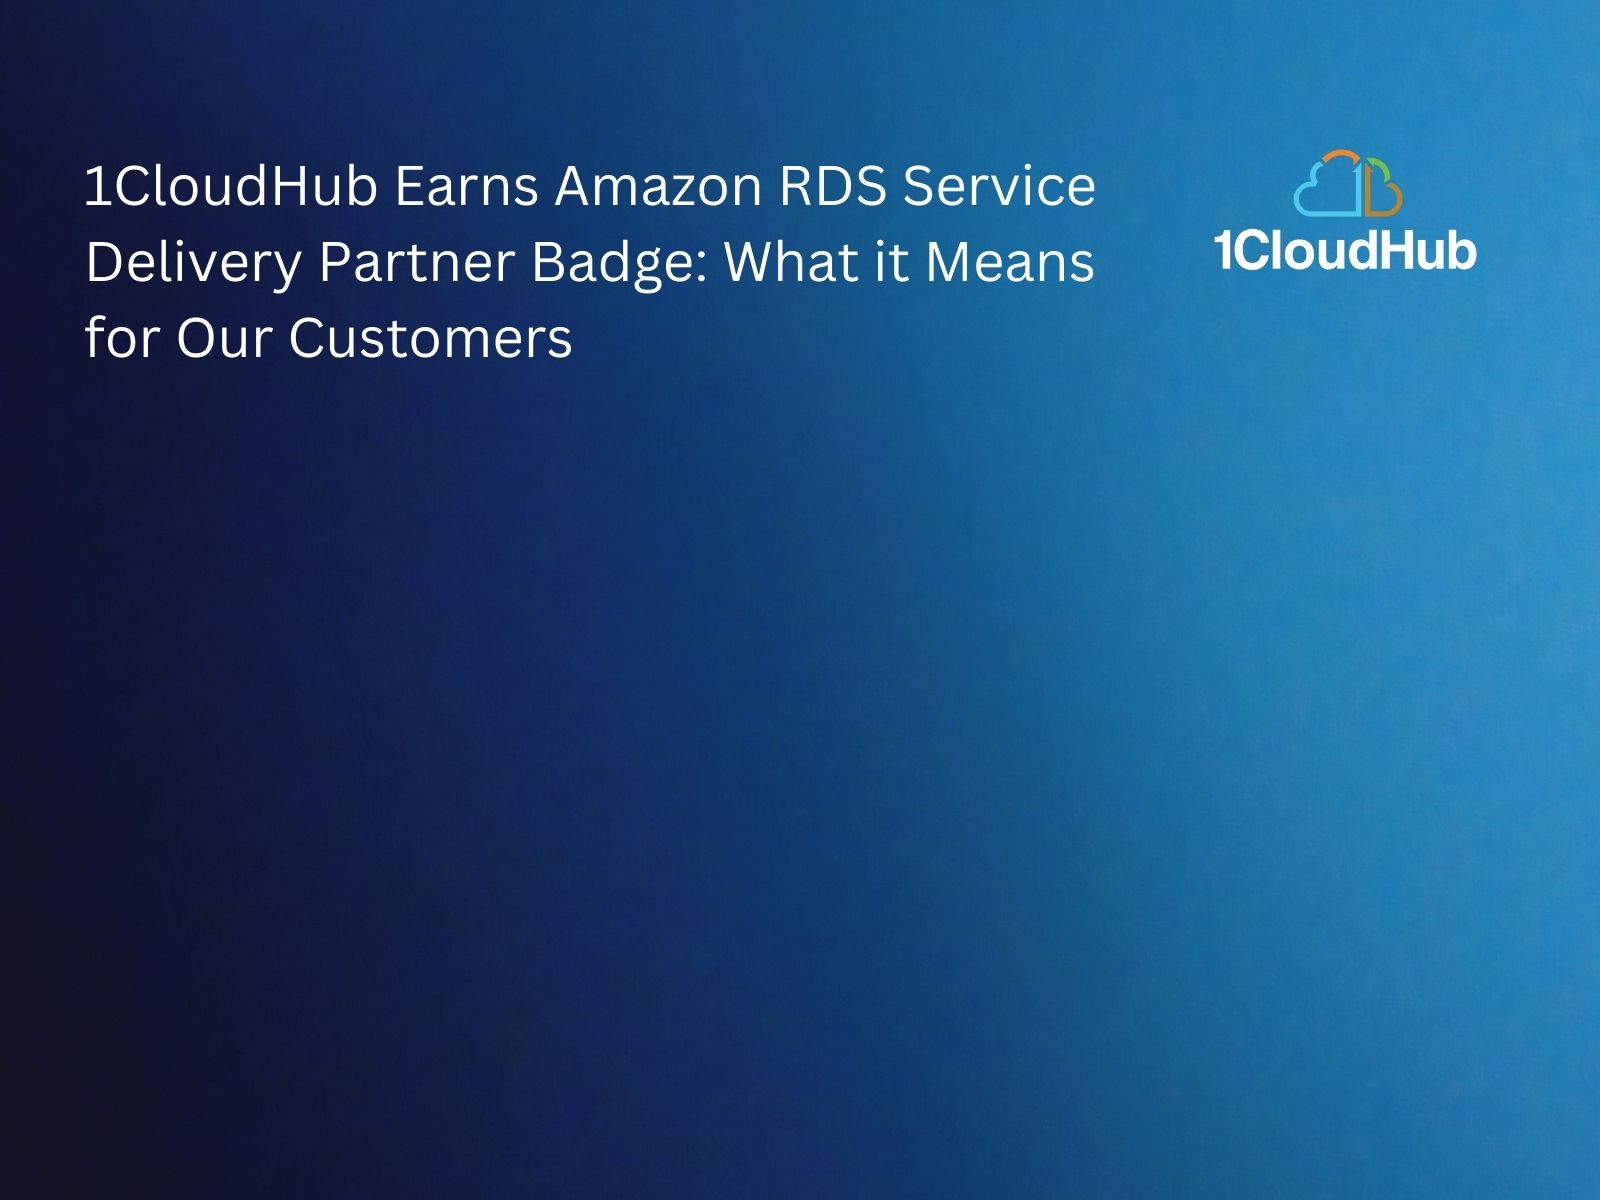 1CloudHub Earns Amazon RDS Service Delivery Partner Badge: What it Means for Our Customers